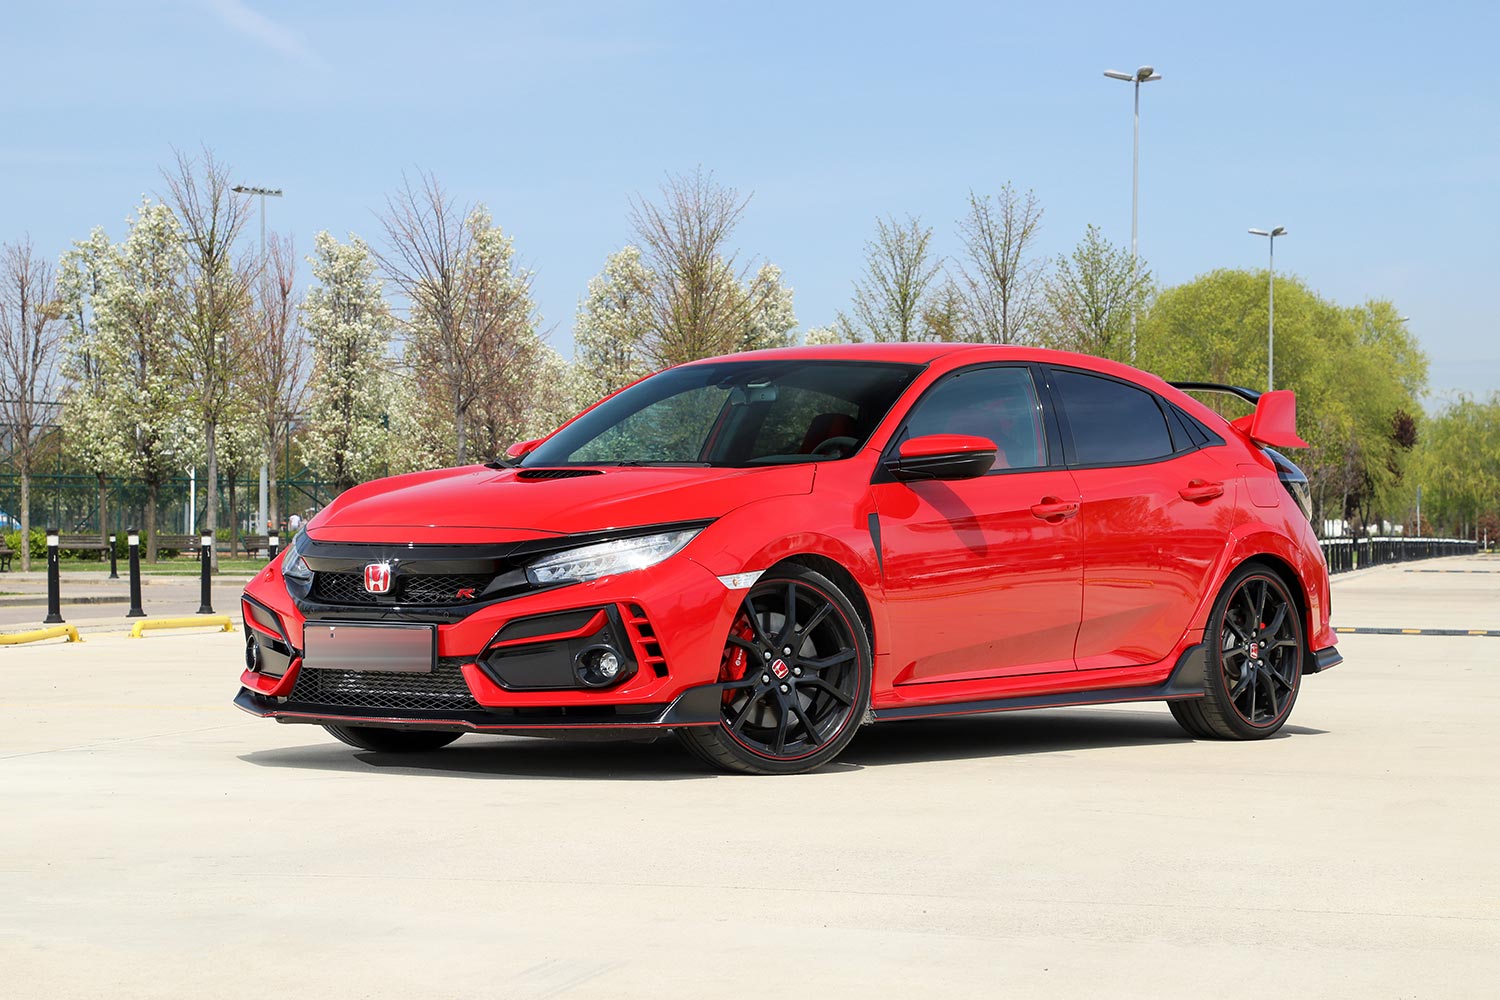 Honda Civic is a line of cars manufactured by Honda